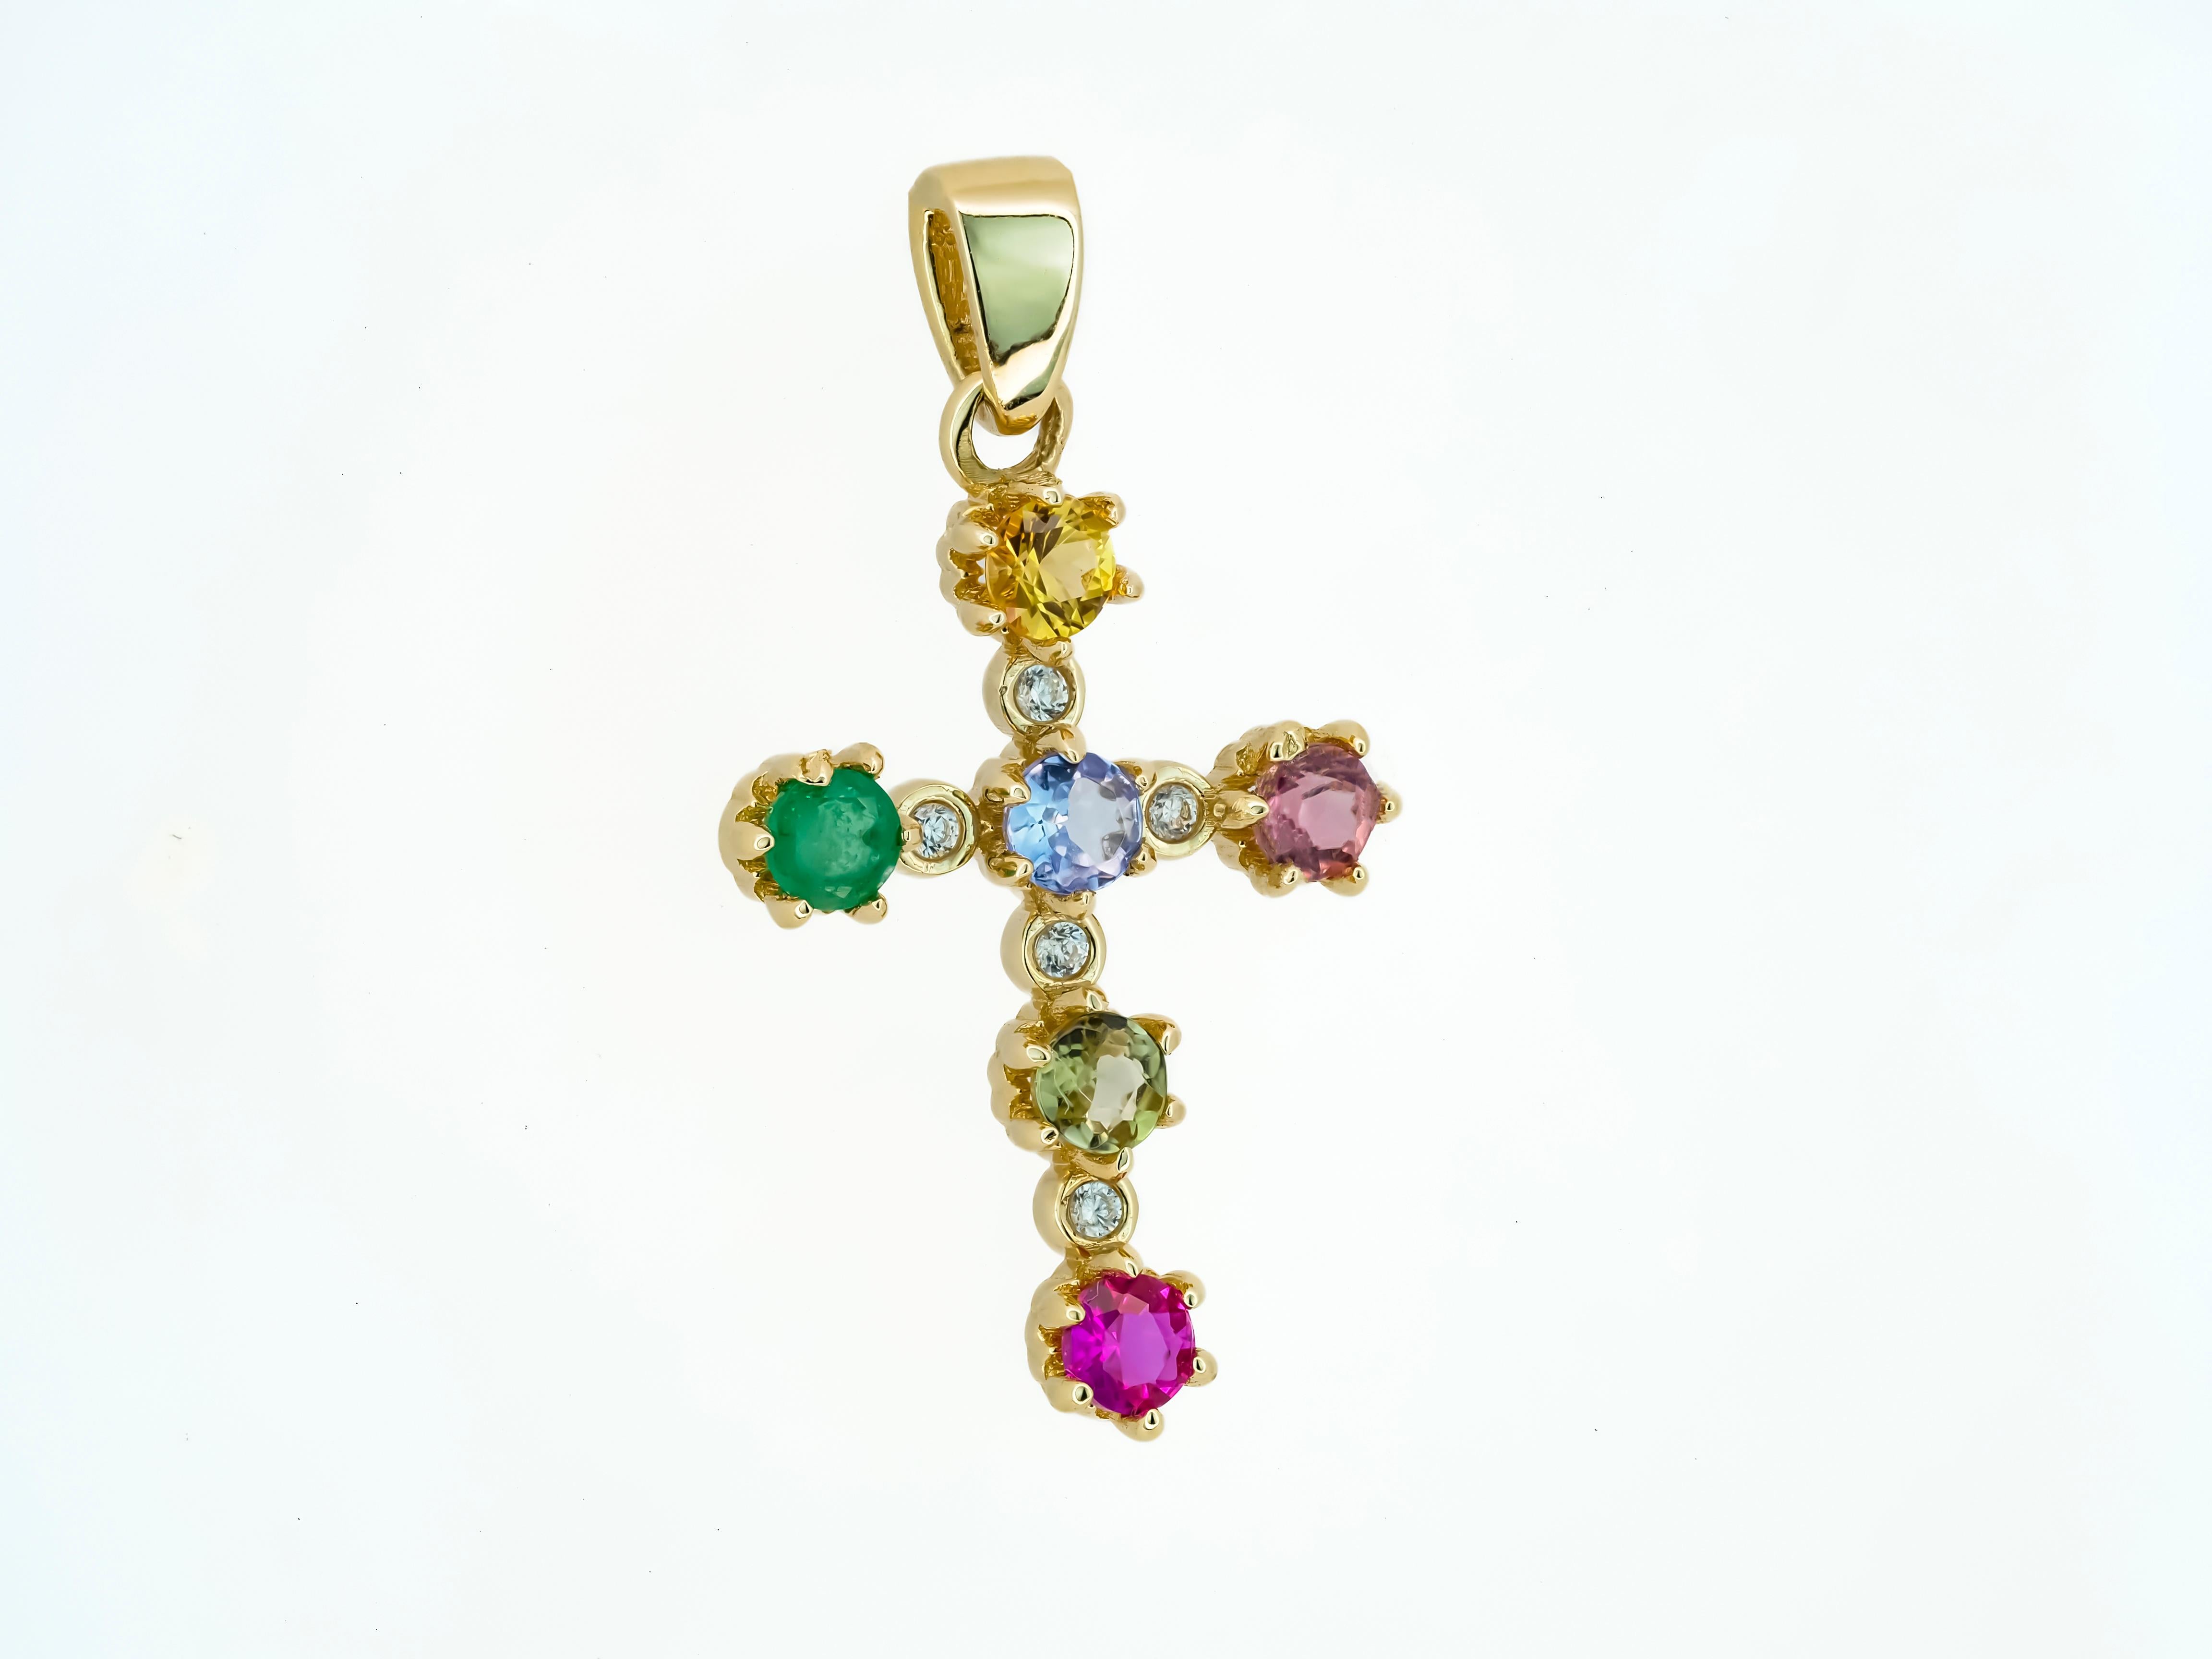 Cross pendant with fancy color sapphires, emerald and diamonds

Weight: 1.2 g.
Gold - 14k yellow gold 
Size -  22x12.5mm
Stones:
1. Fancy color sapphires 6 pieces - round cut, green, pink, red, light blue, yellow and purple color, transparent,